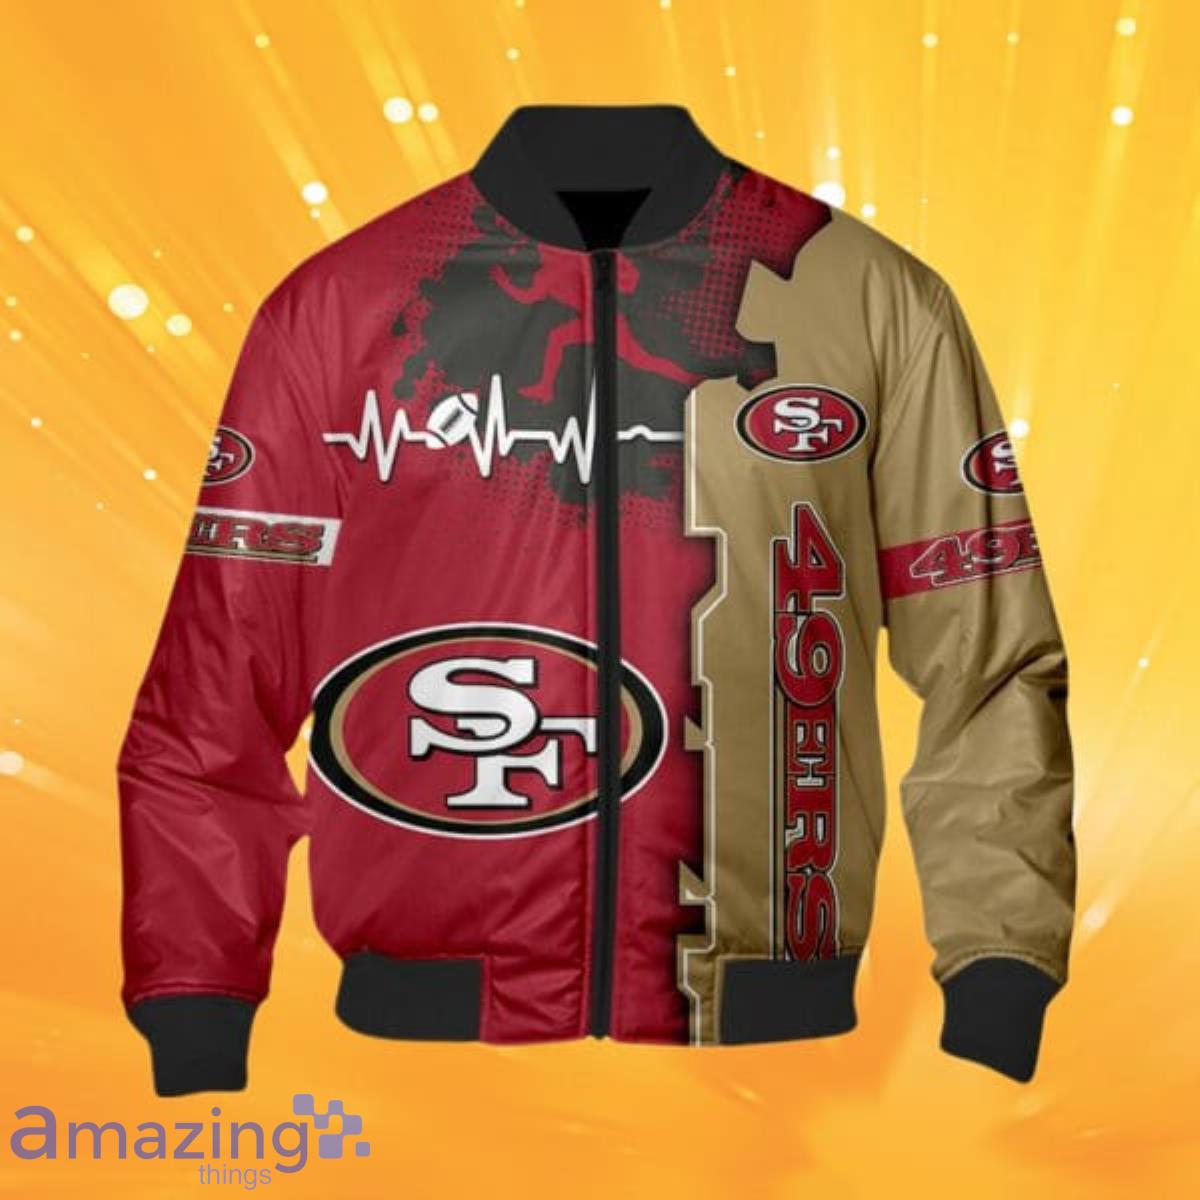 San Francisco 49ers NFL Bomber Jacket Style Gift For Fans Product Photo 1